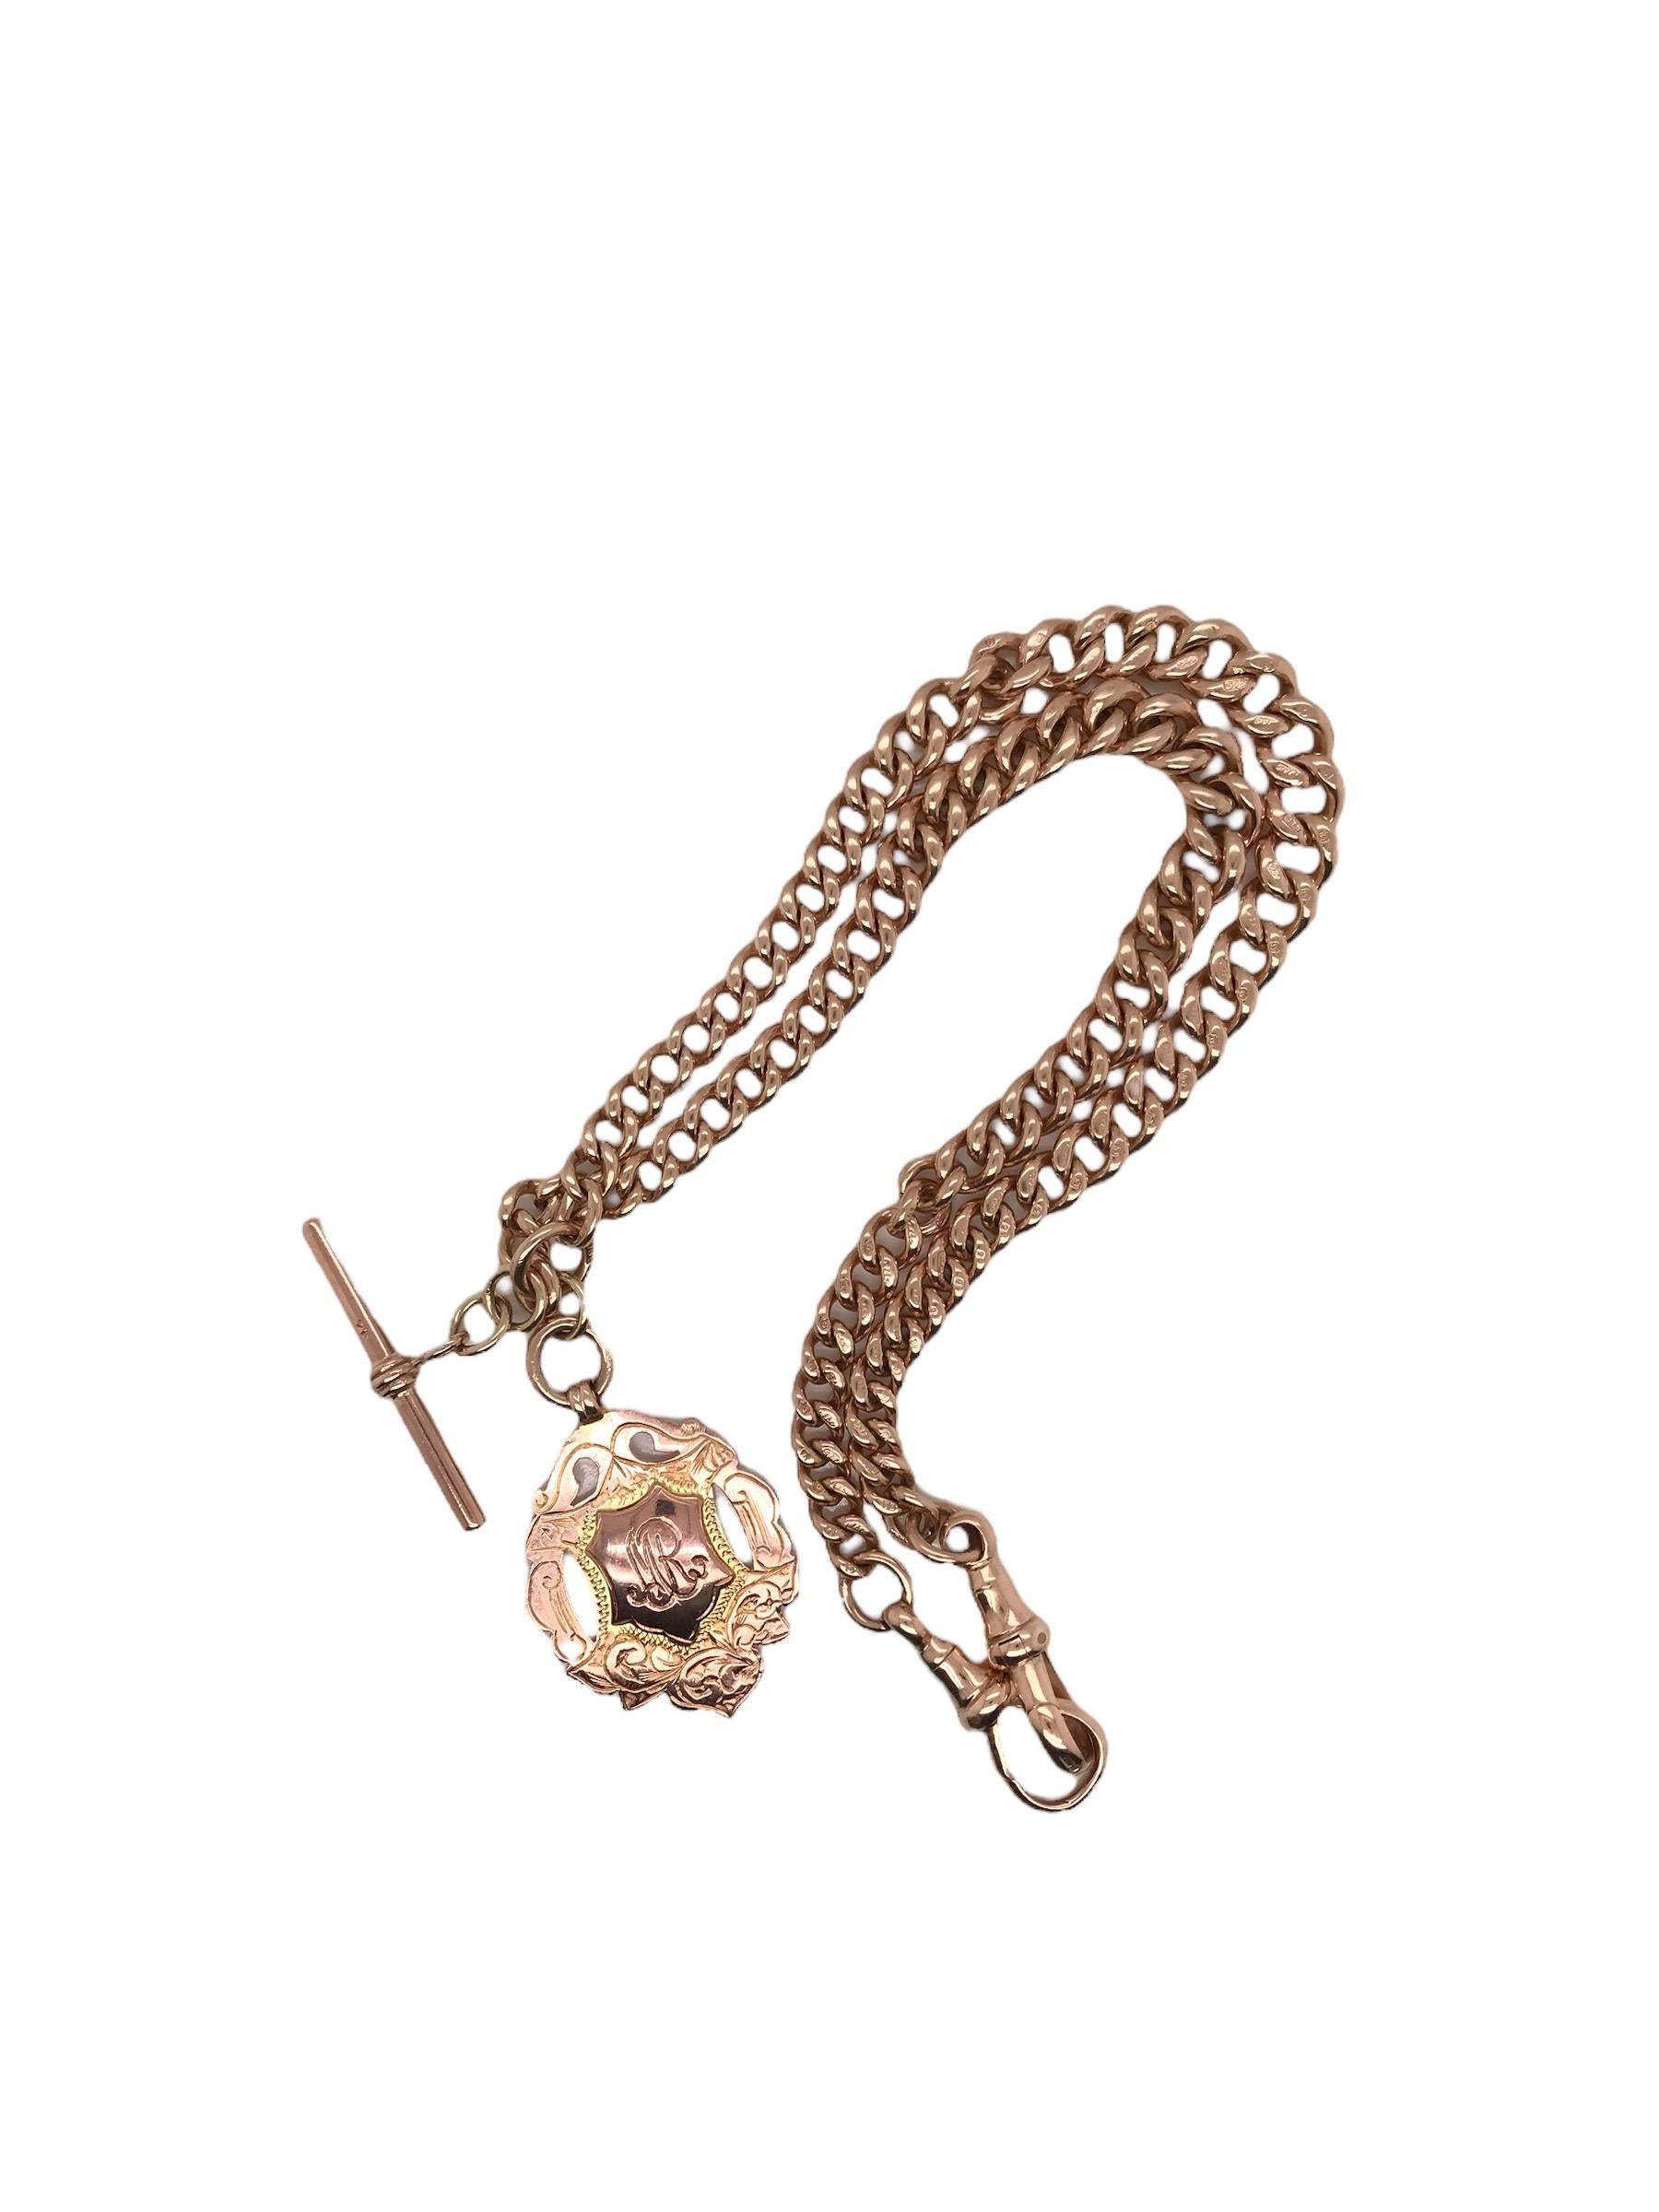 Victorian Era Watch Chain Toggle Necklace 9K Rose Gold In Excellent Condition For Sale In Montgomery, AL